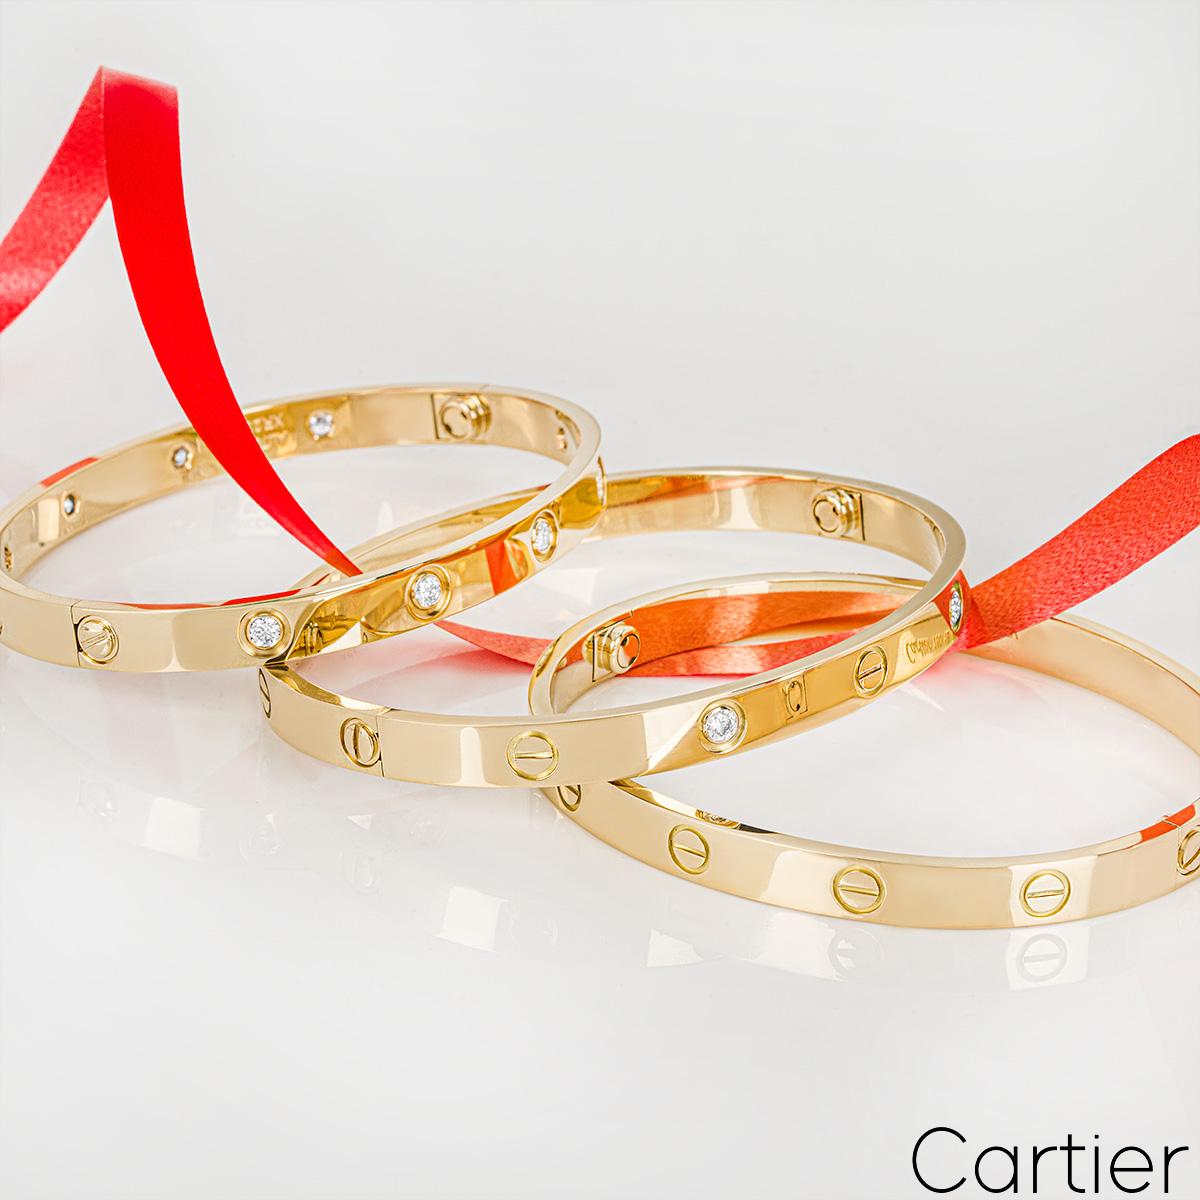 Cartier Yellow Gold Half Diamond Love Bracelet Size 16 B6035916 In Excellent Condition For Sale In London, GB